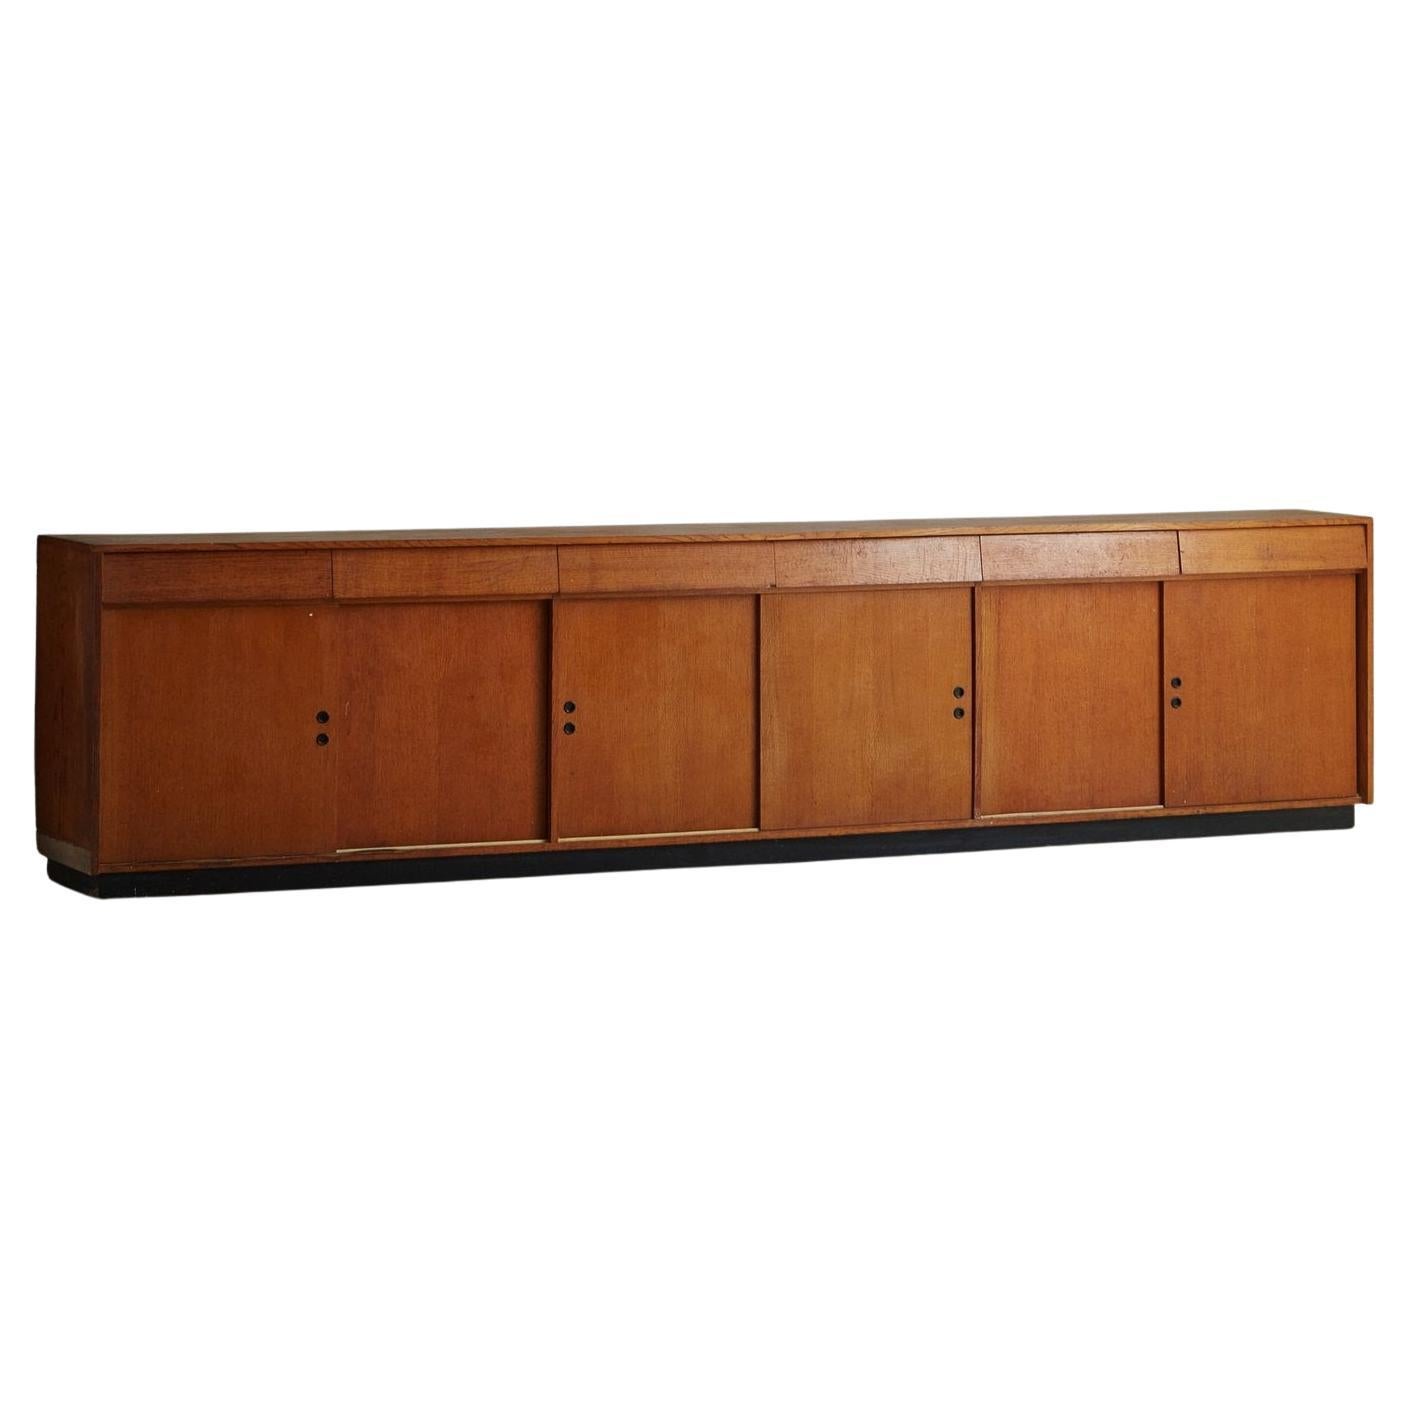 Monumental Oak Shop Cabinet with Drawers, France 1950s For Sale